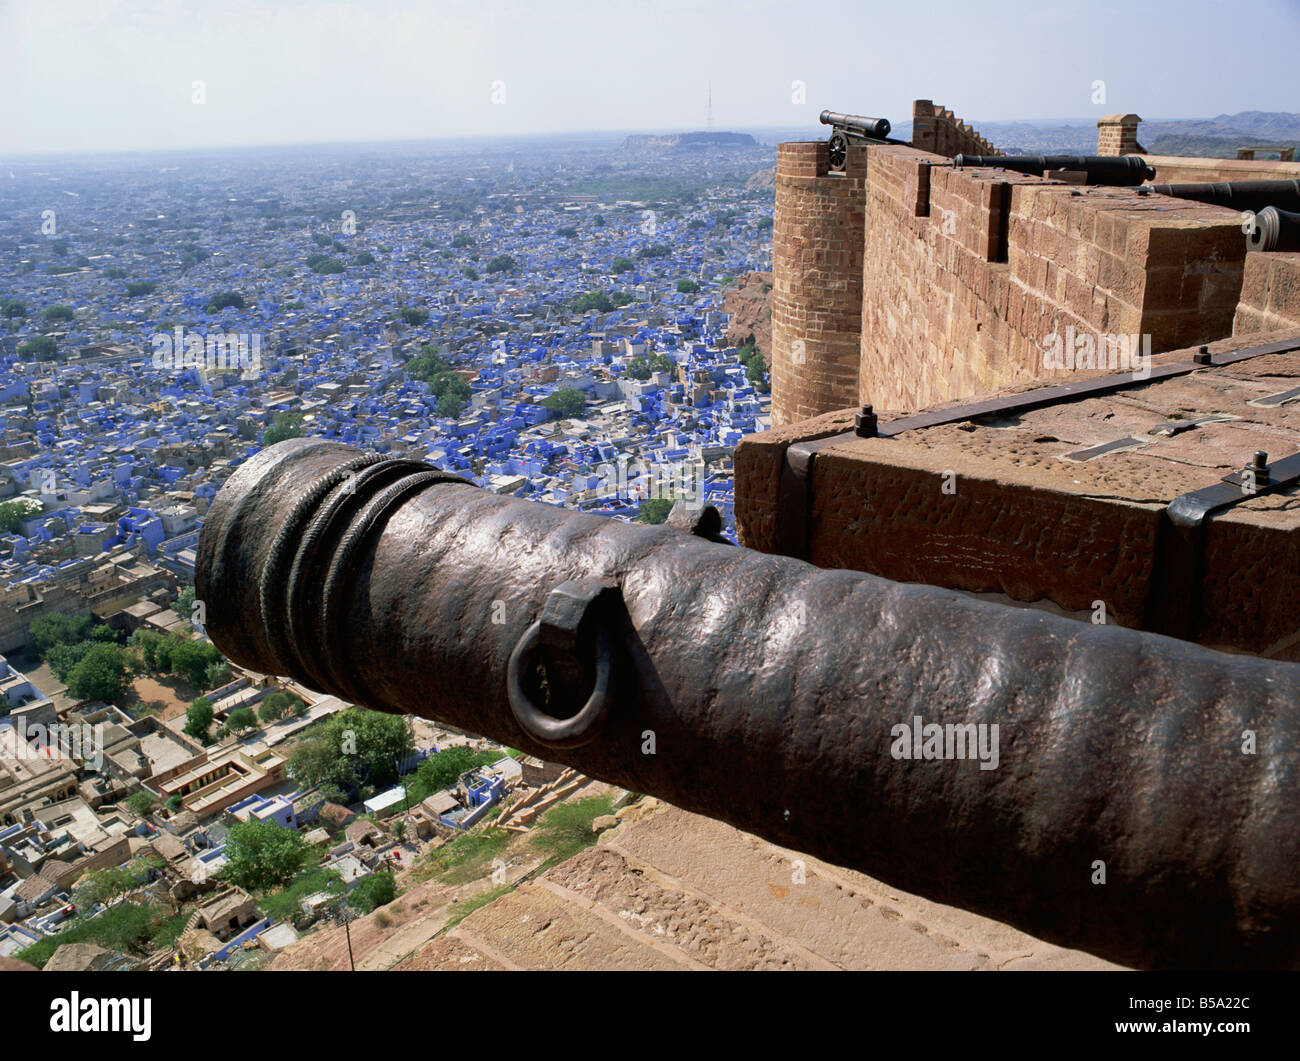 Old cannon and view over Old City from Fort Jodhpur Rajasthan state India Asia Stock Photo